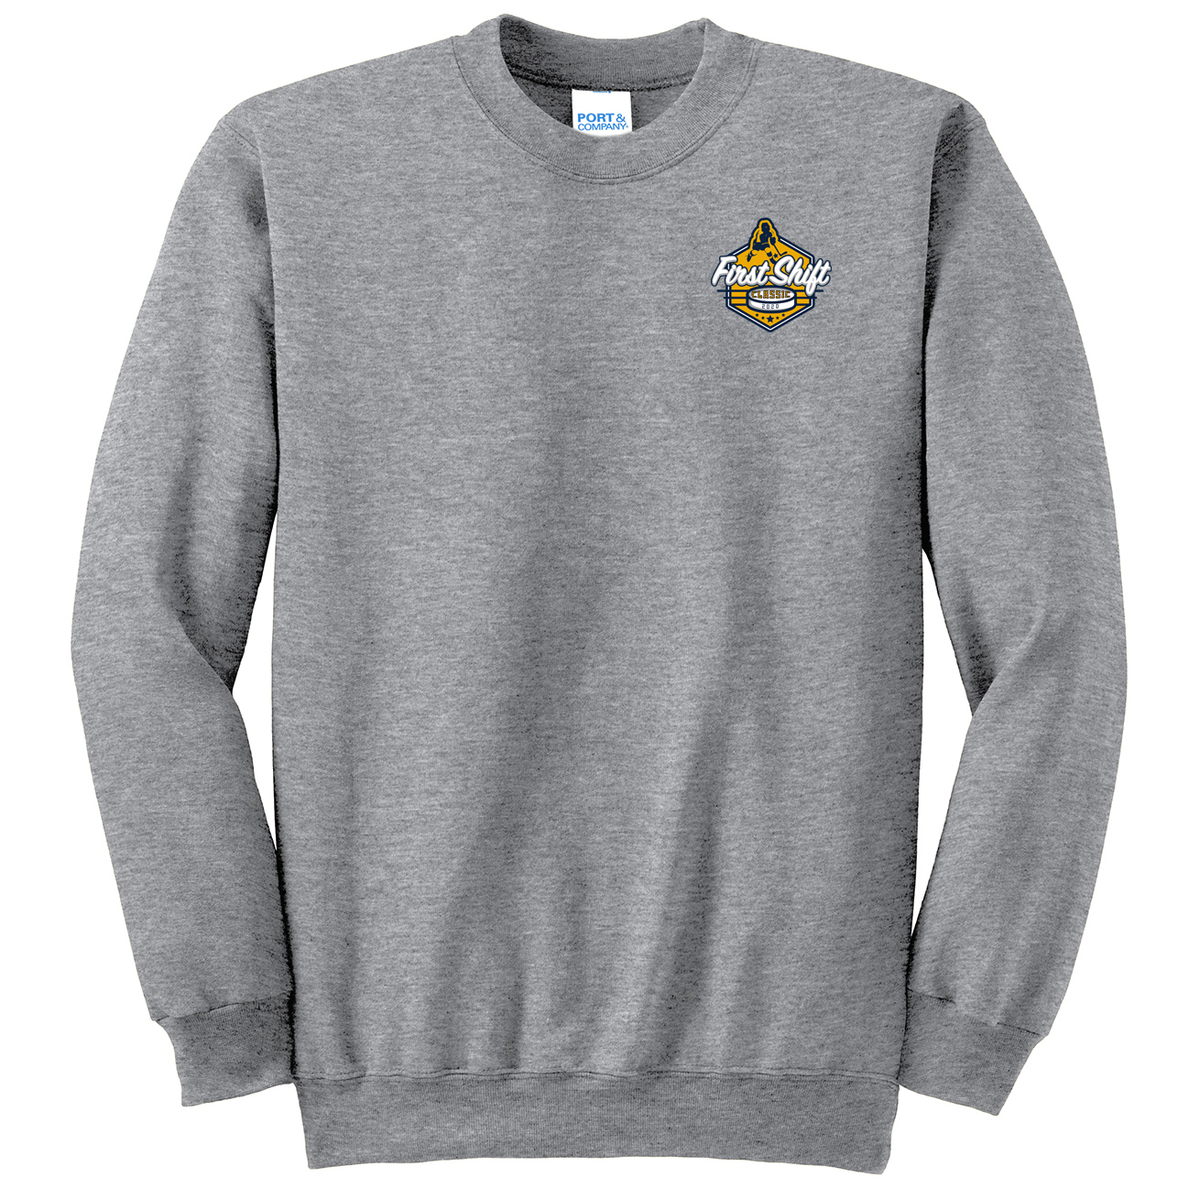 First Shift Charity Classic Crew Neck Sweater